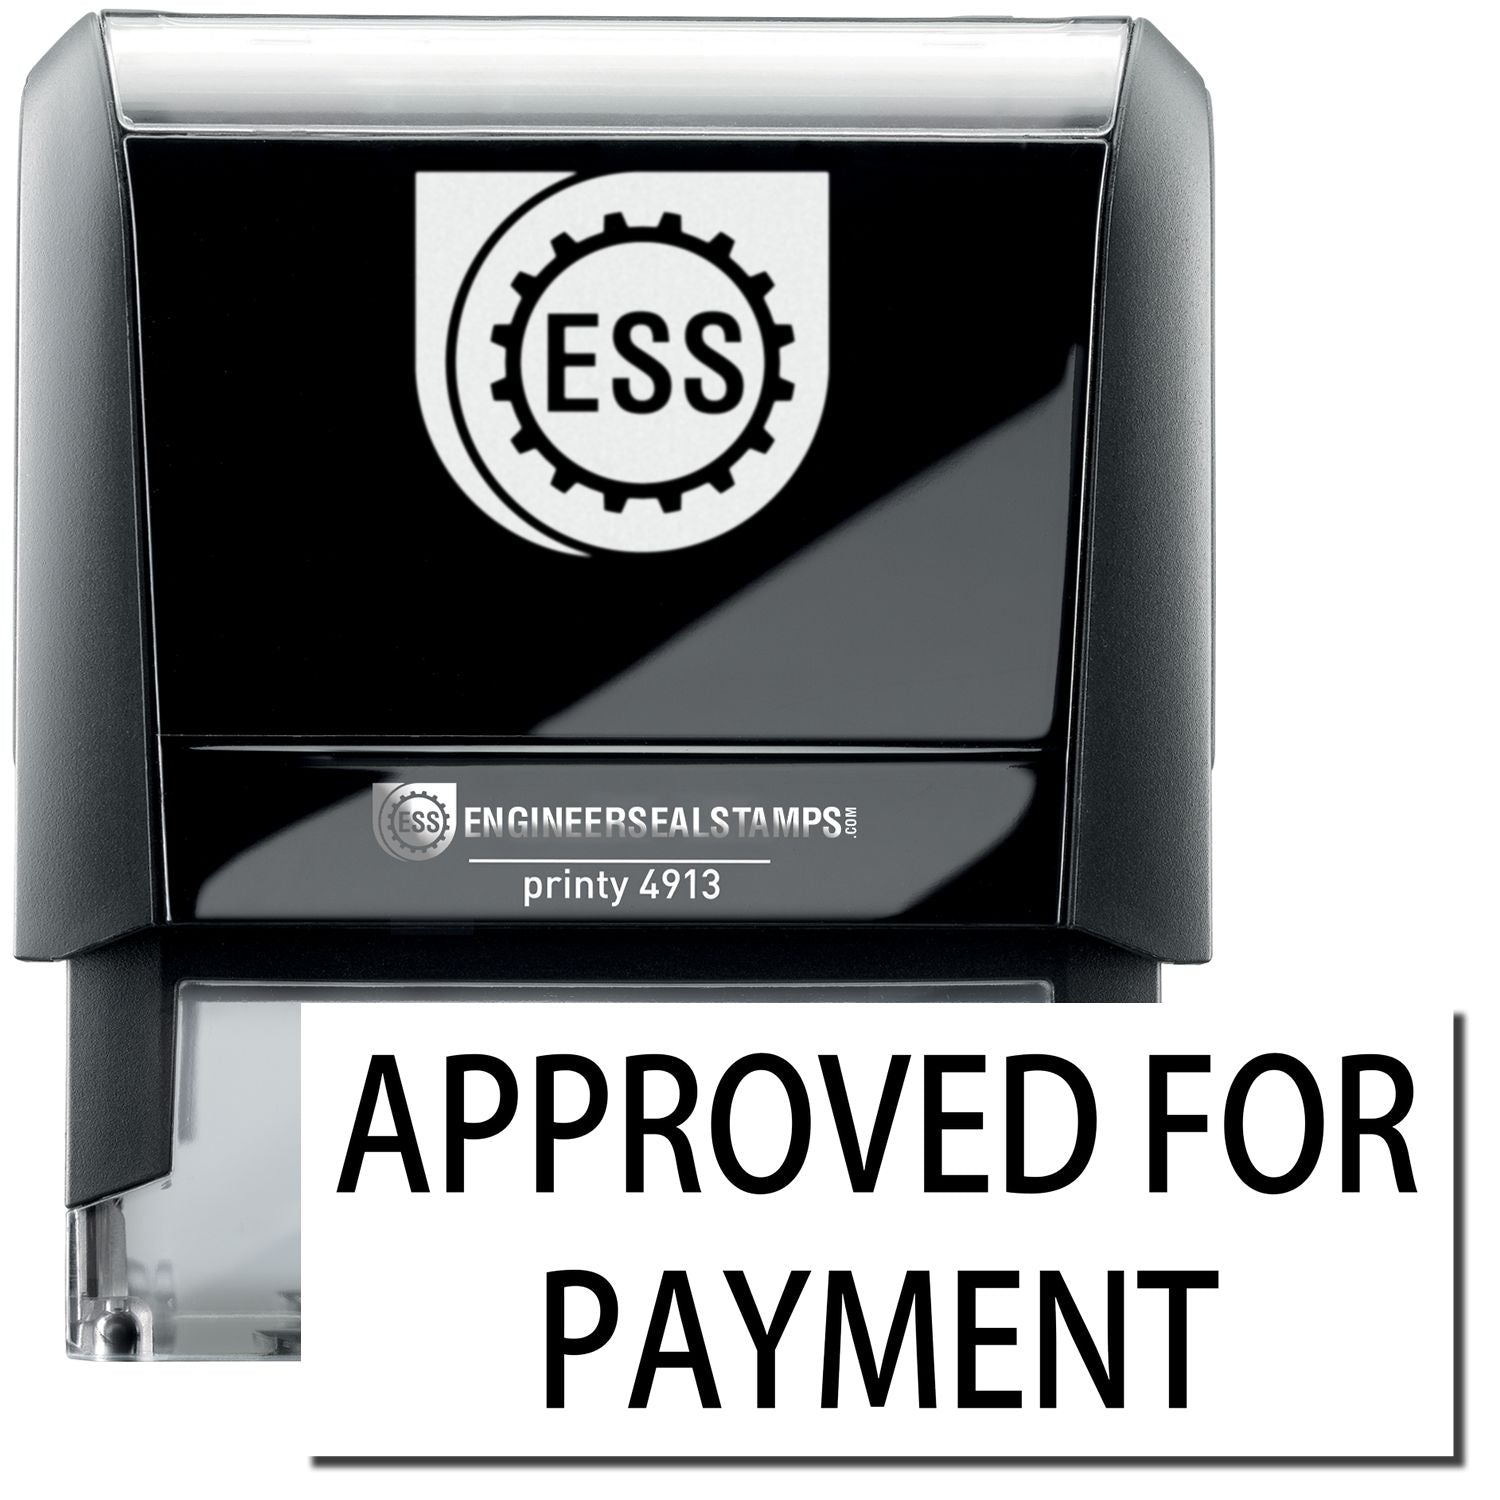 A large self-inking stamp with a stamped image showing the text "APPROVED FOR PAYMENT" in a large font displayed by it.